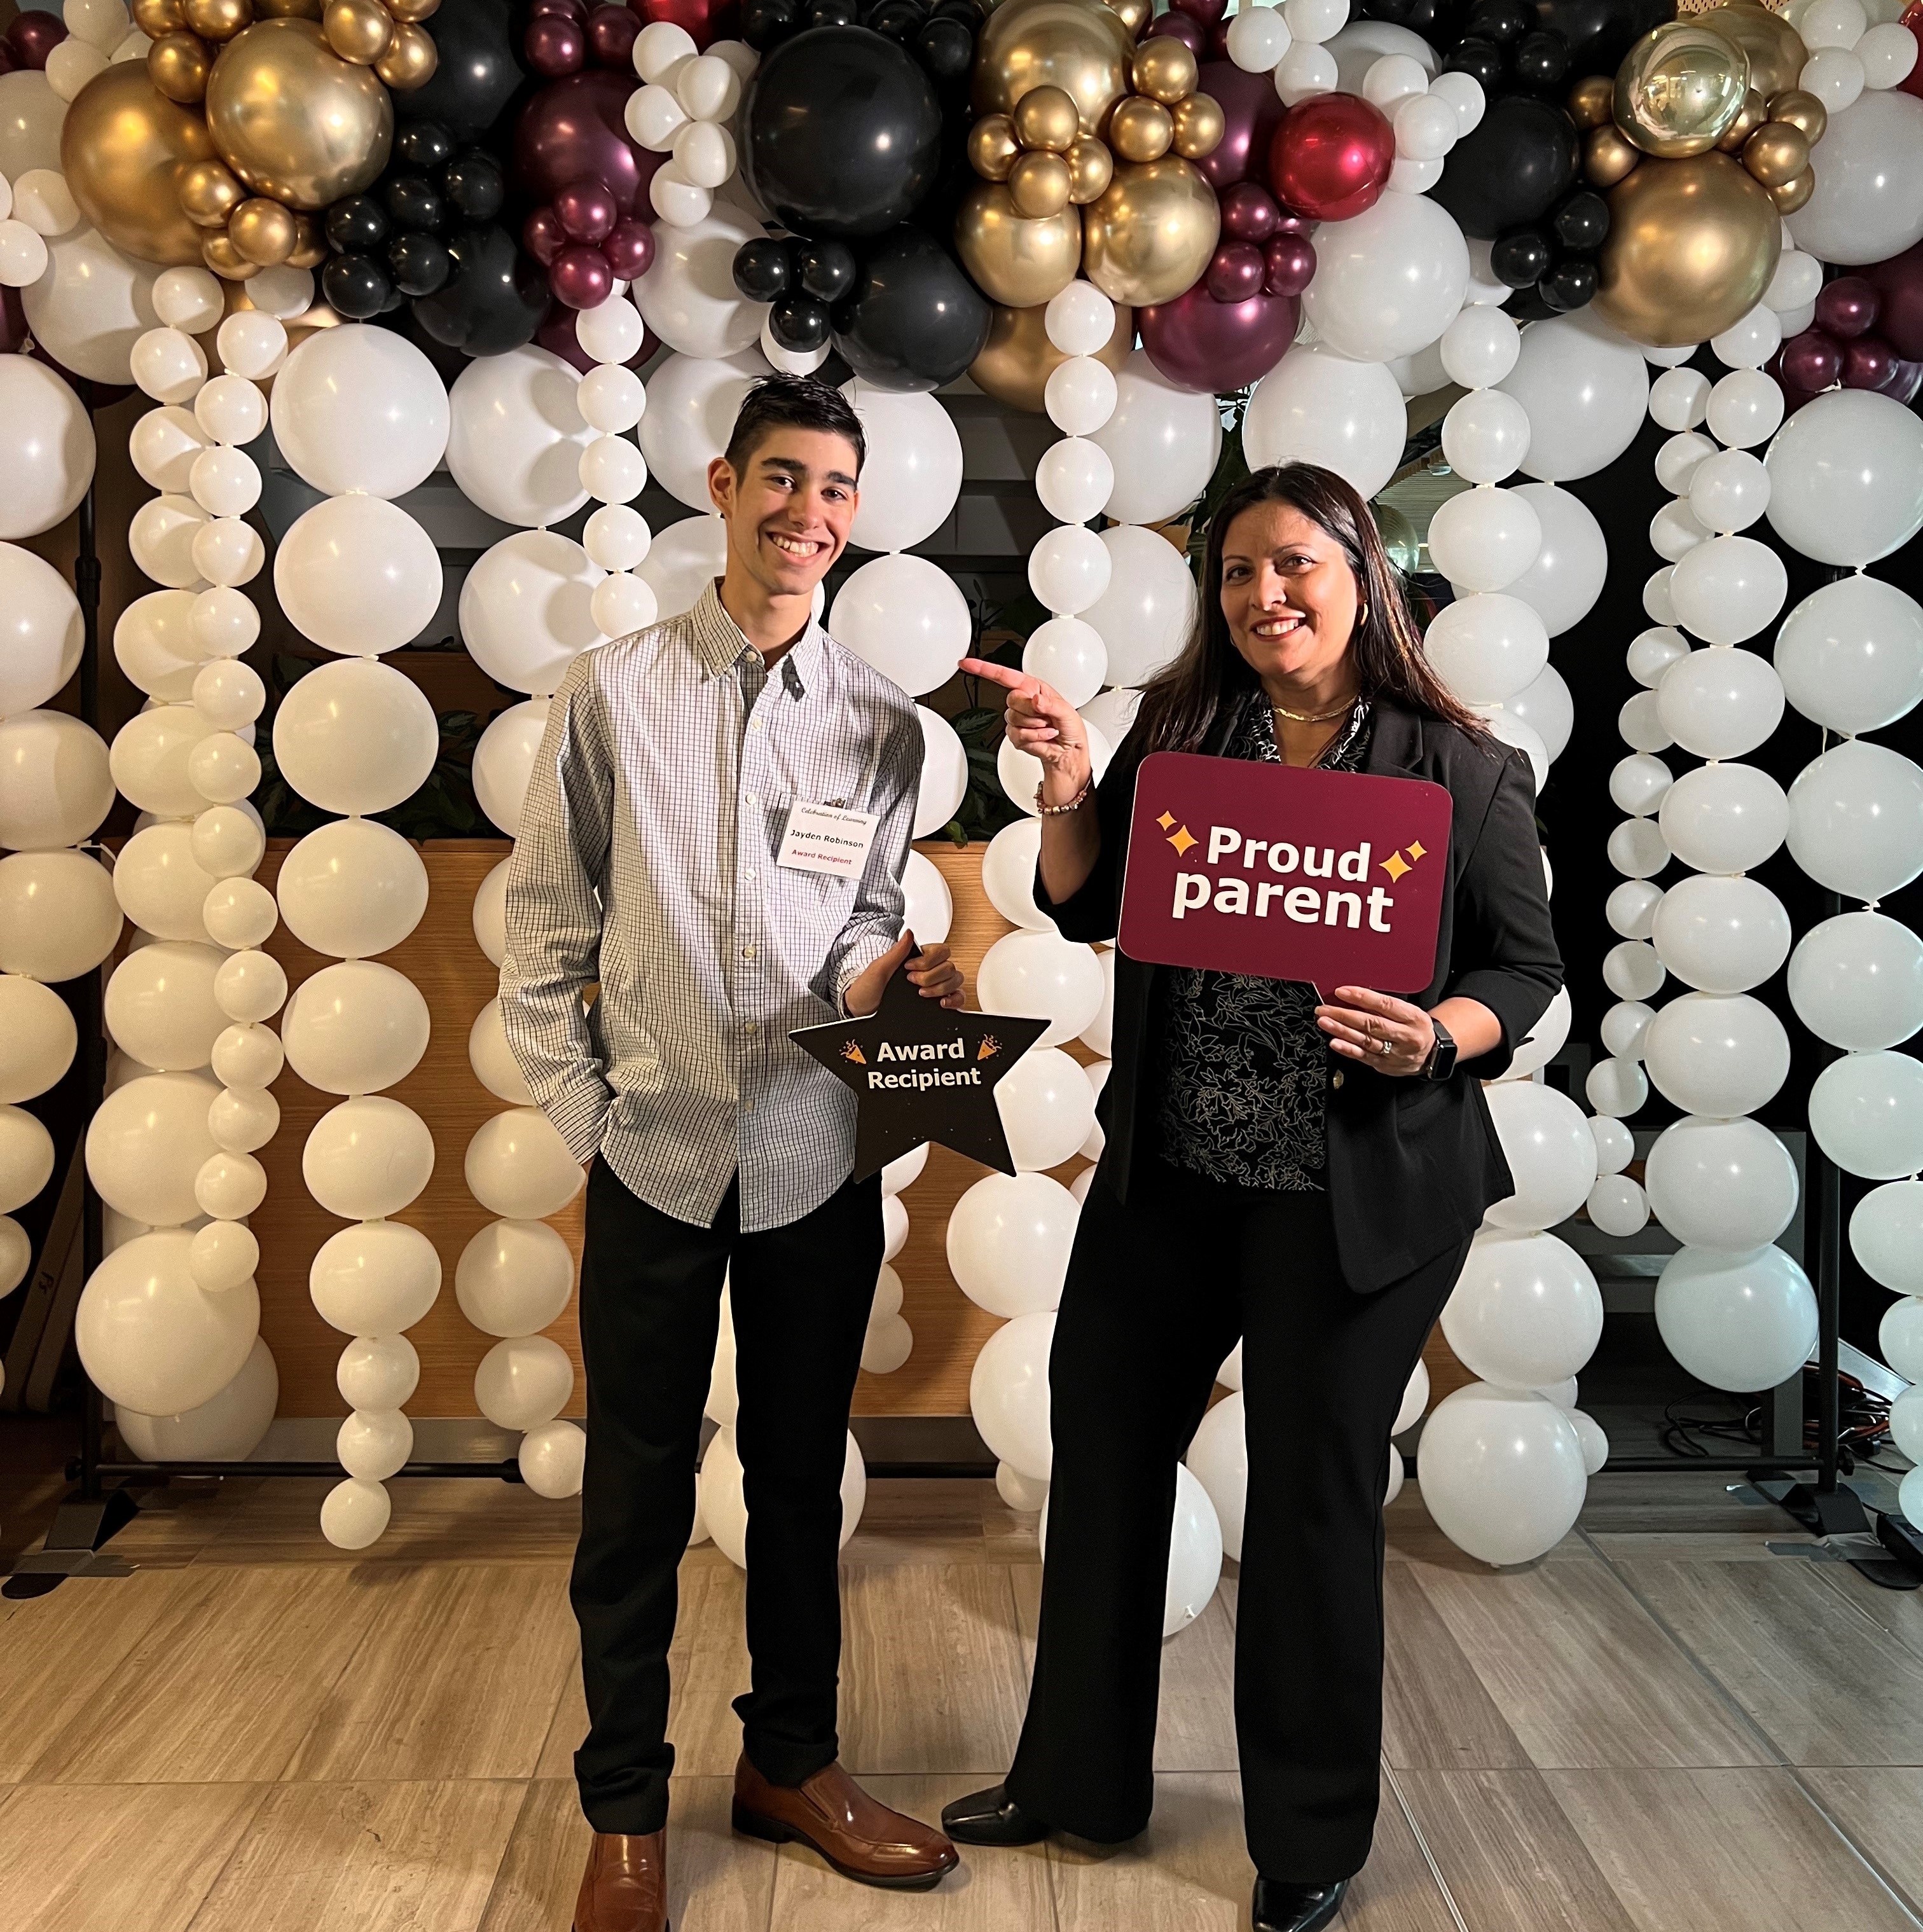 Jayden holding a sign that reads "Award recipient" with his mother who is holding a sign that reads "proud parent". There are balloons in the background.